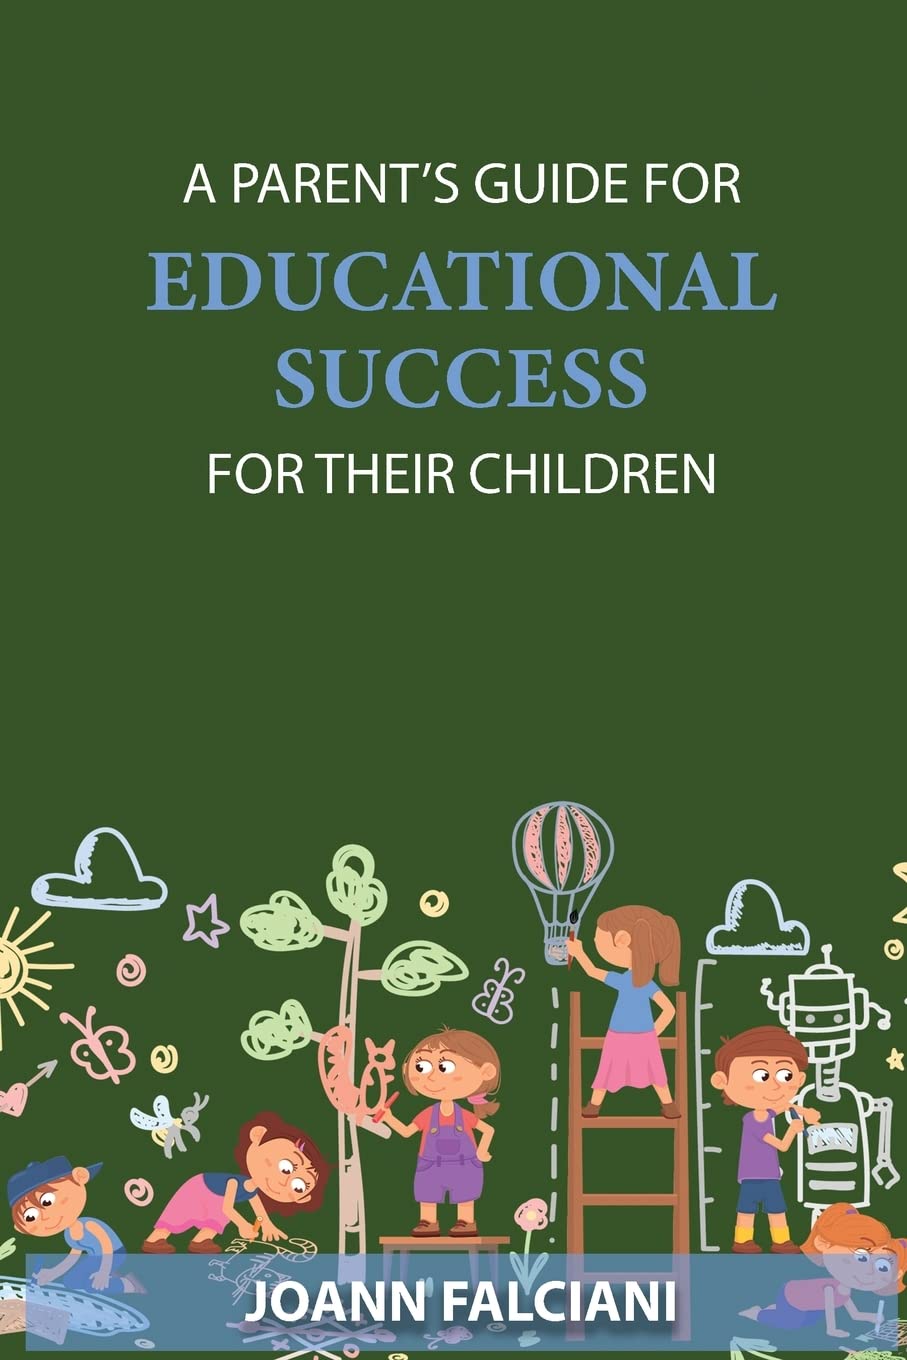 Joann Falciani, Author’s Tranquility Press Delivers A Parent's Guide for Educational Success for Their Children